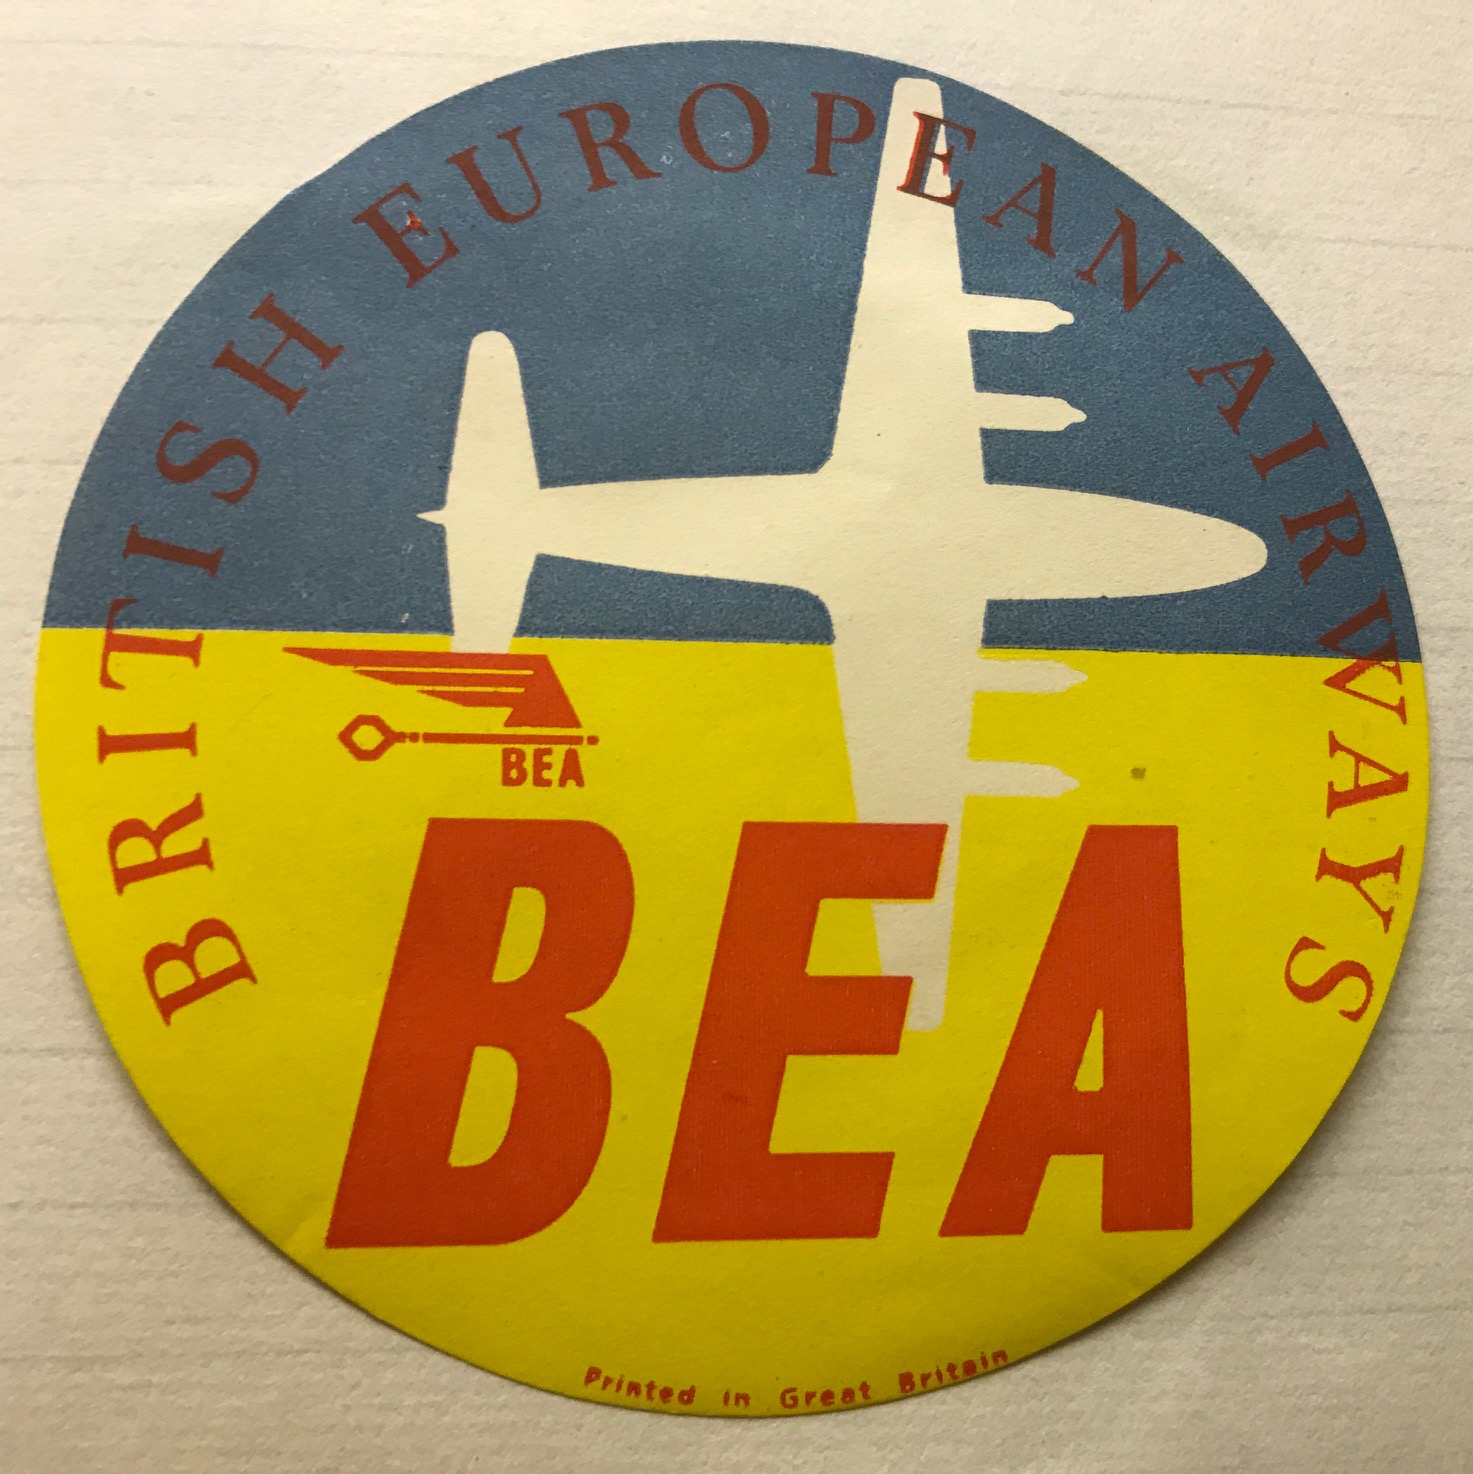 Trevor's Stickies: British European Airways. BEA. Had a much younger image. Bobby nearly worked for them. Passing examinations, right up to the last interview. Air traffic control doesn't sound good for a GAD sufferer! The airliner outline is the Vickers Viscount, which should get its own story. Merged with BOAC to form British Airways in 1974.